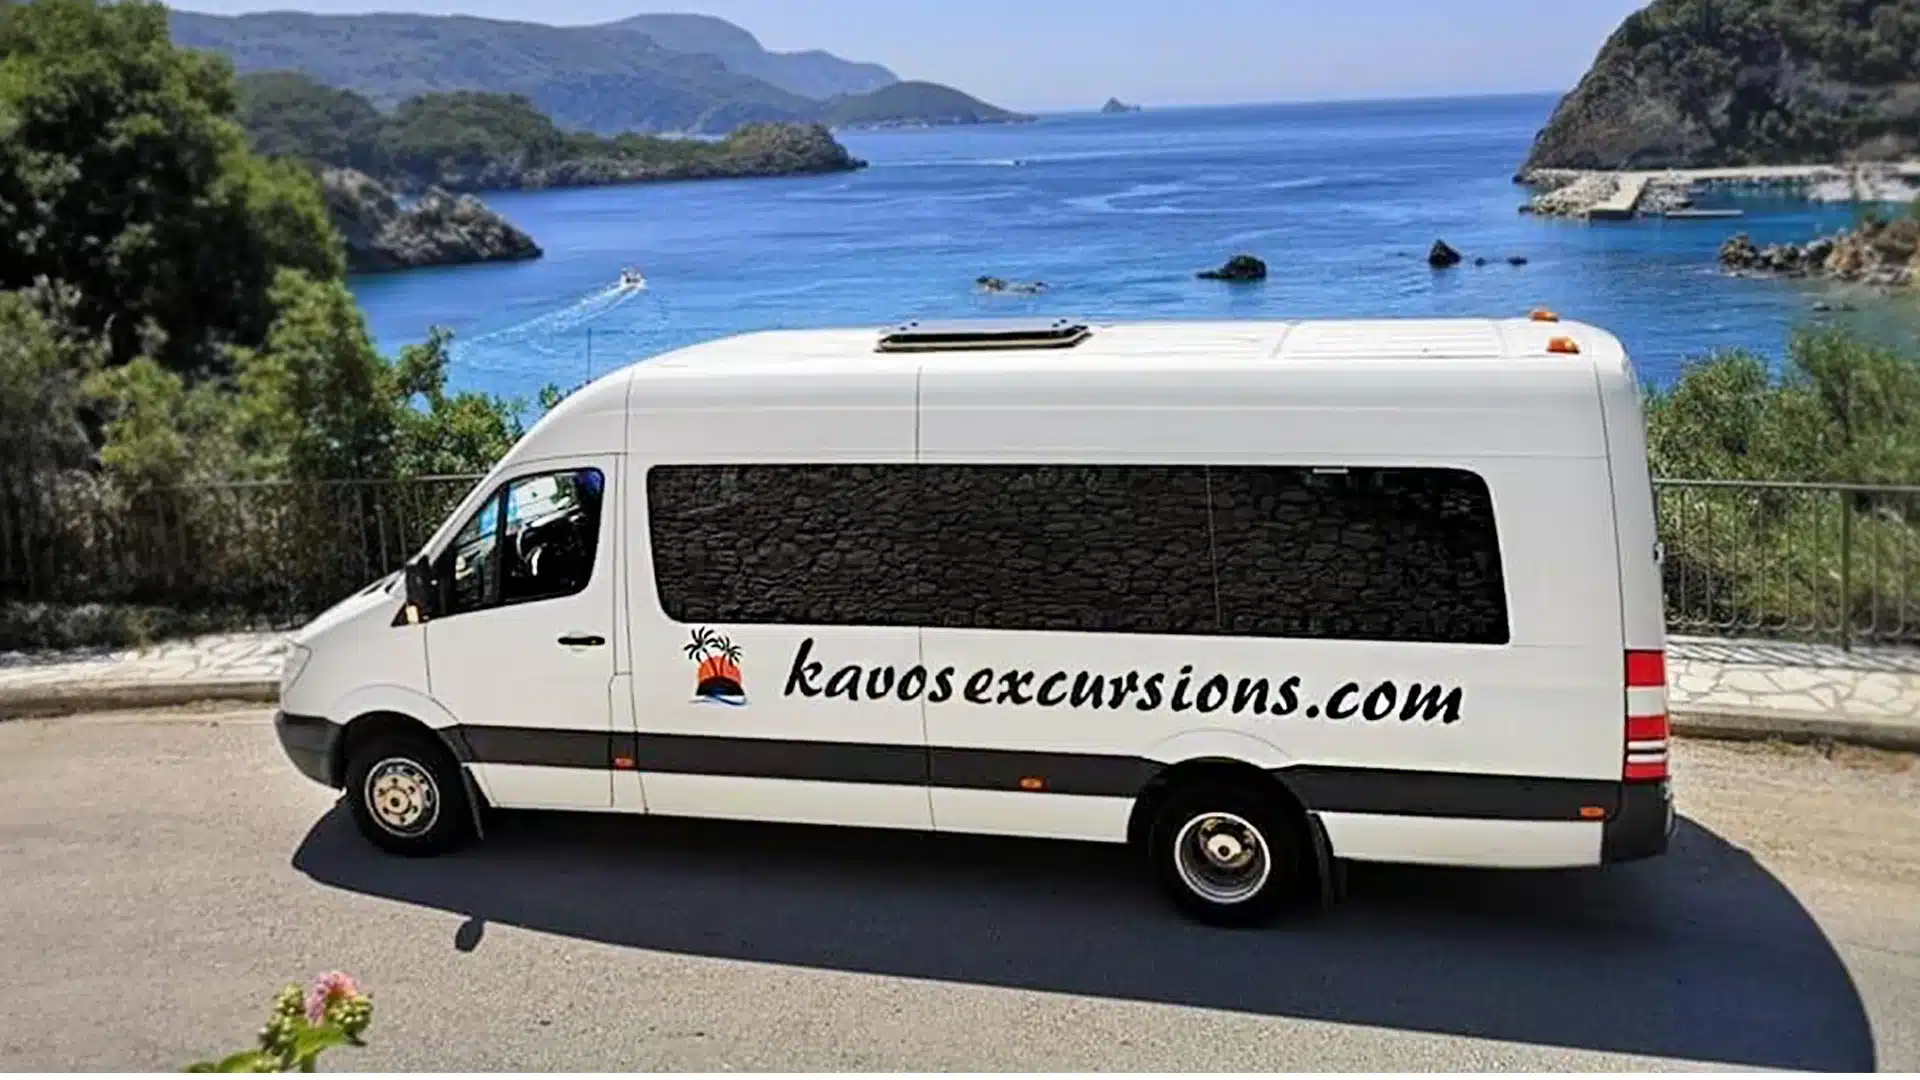 a kavos excursions mini bus parked in front of a beach